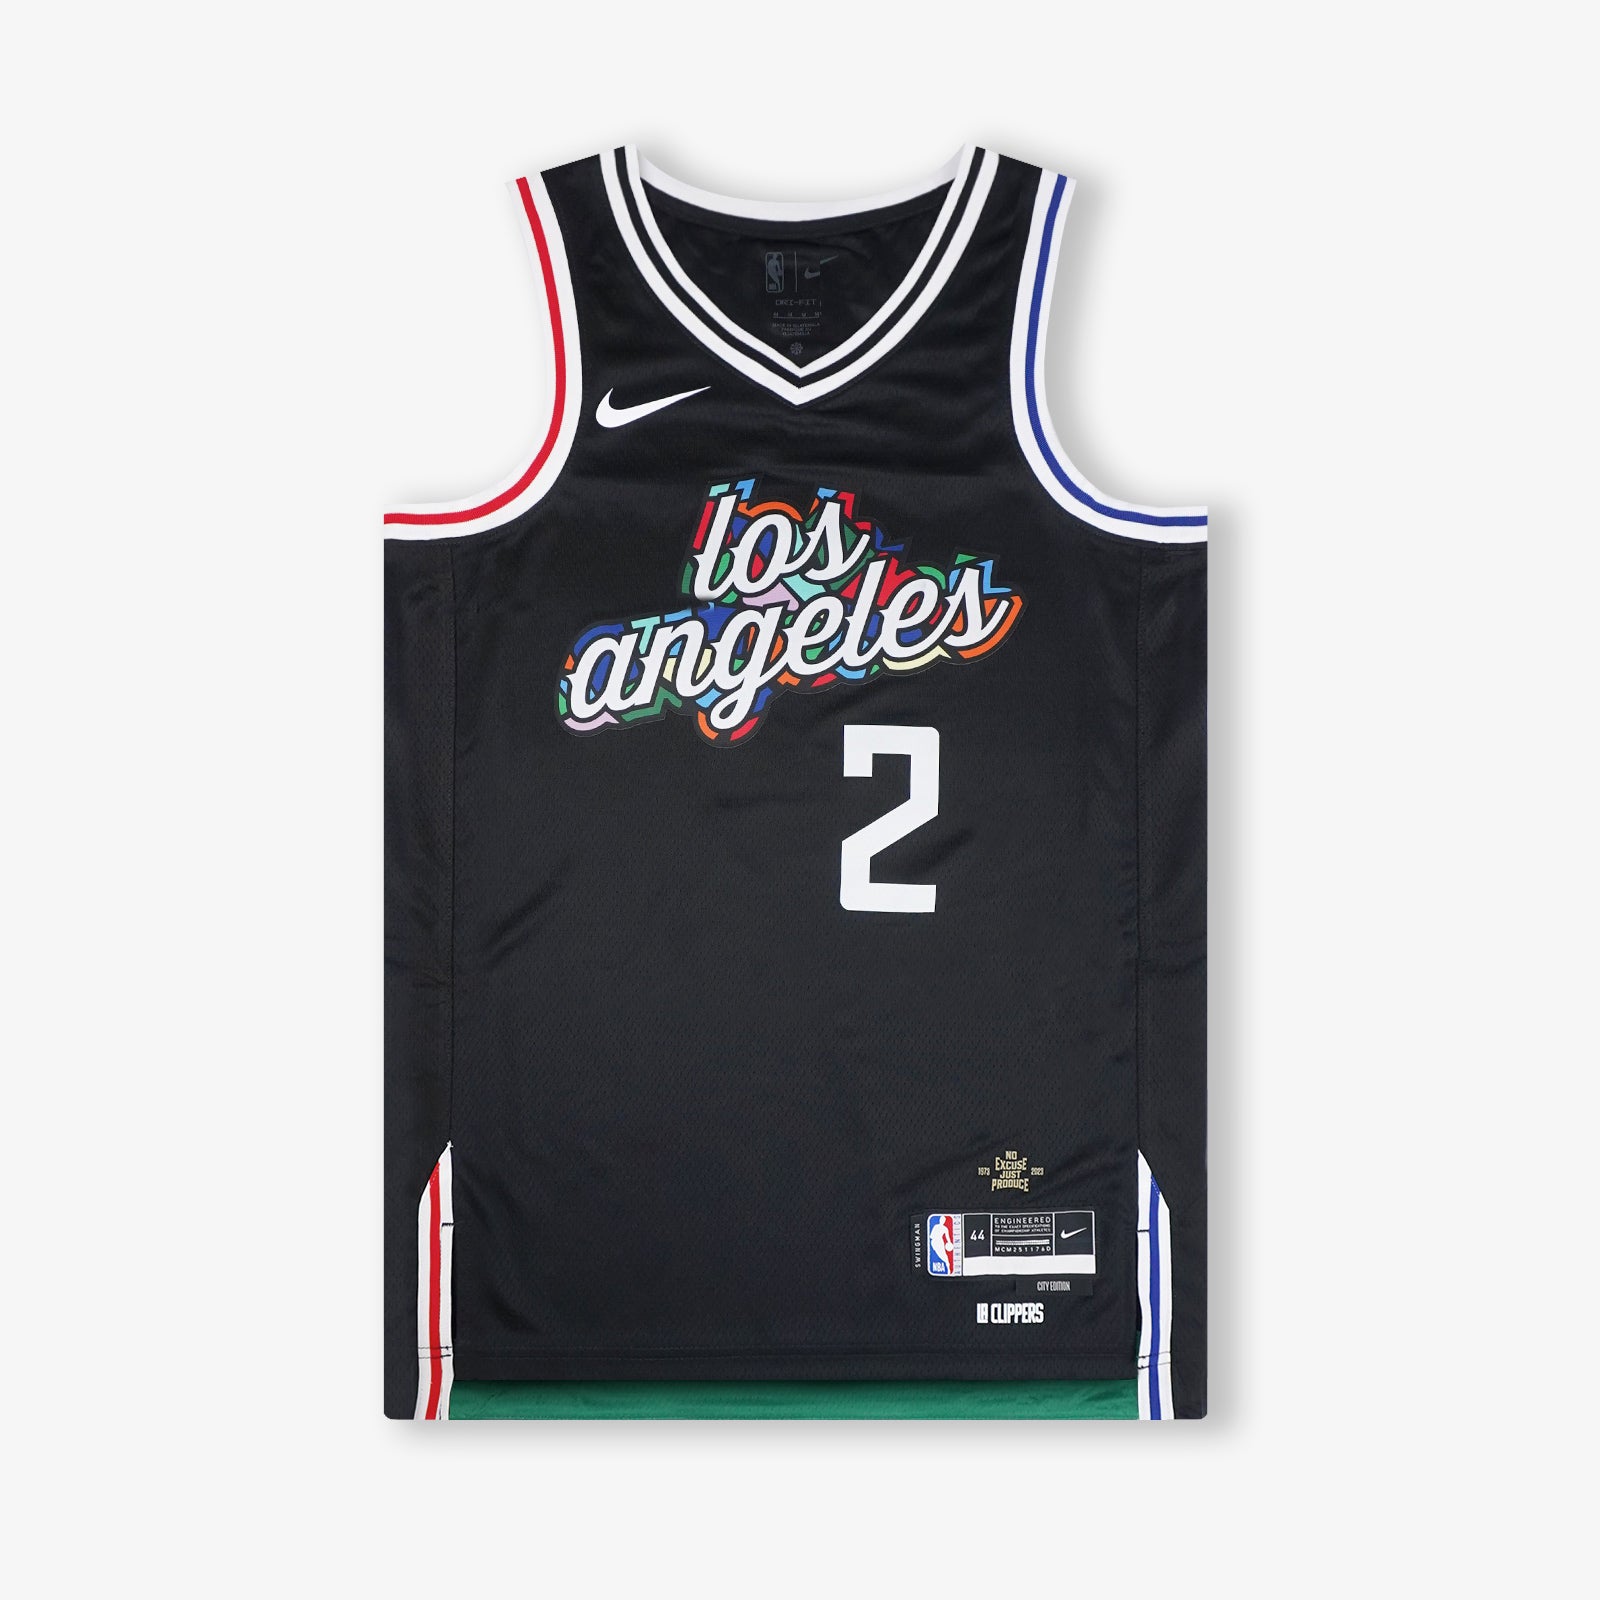 Official Los Angeles Clippers Merchandise